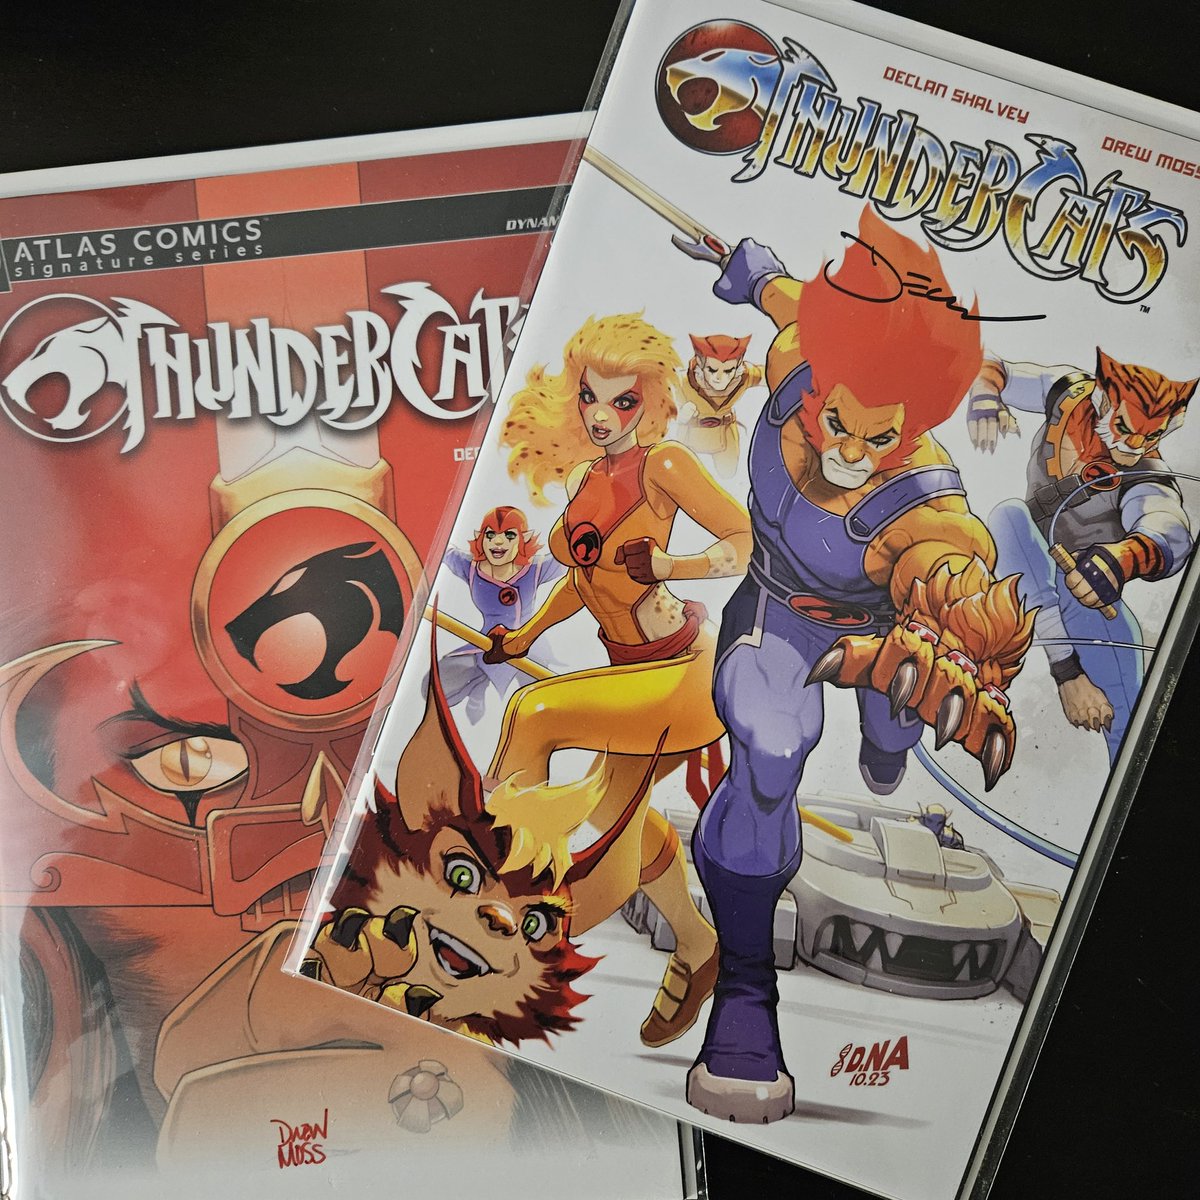 Shout out to @declanshalvey & @drew_moss and the @DynamiteComics family for hooking me up with these! My heart is overflowing with the power of Thundera 😍😍😍😍